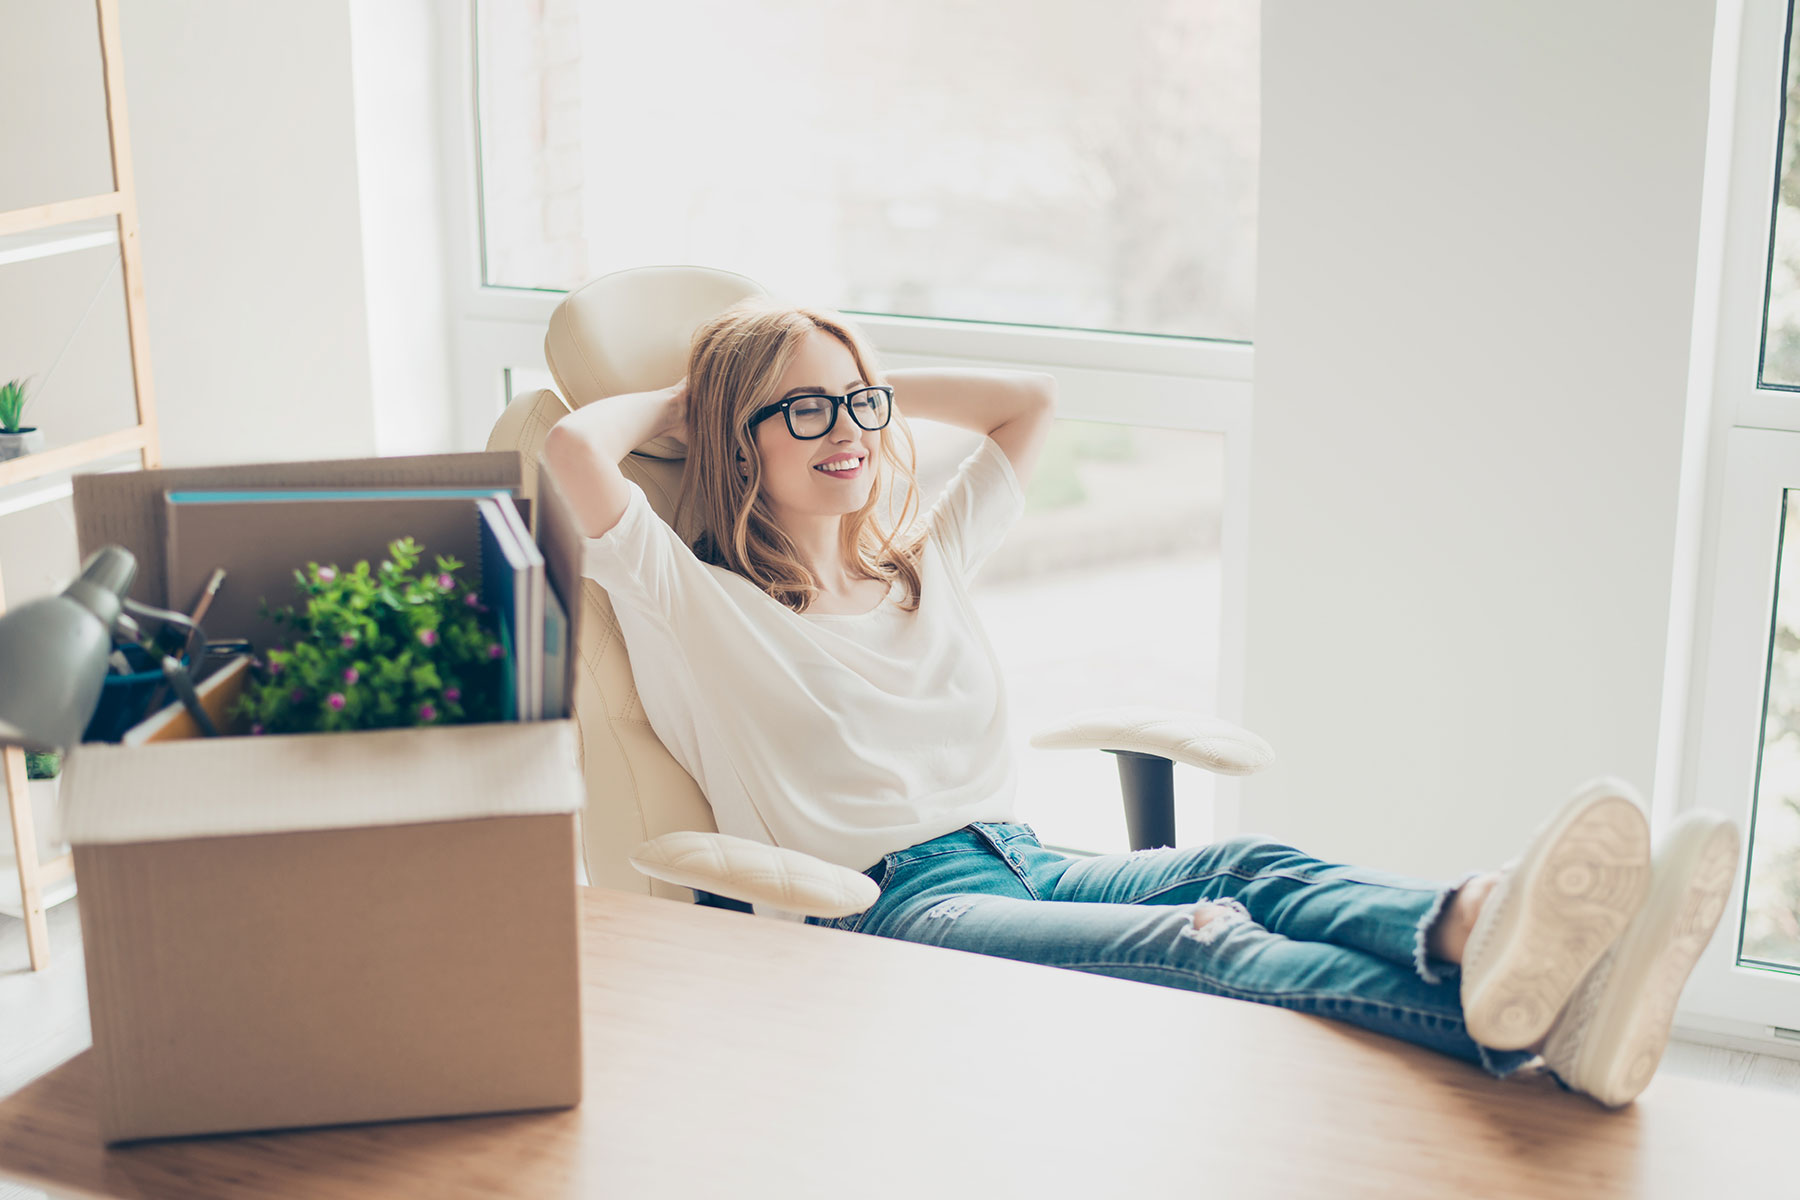 content woman lounges in office chair at desk in what appears to be a home office with small box of desk and office supplies sitting on desk